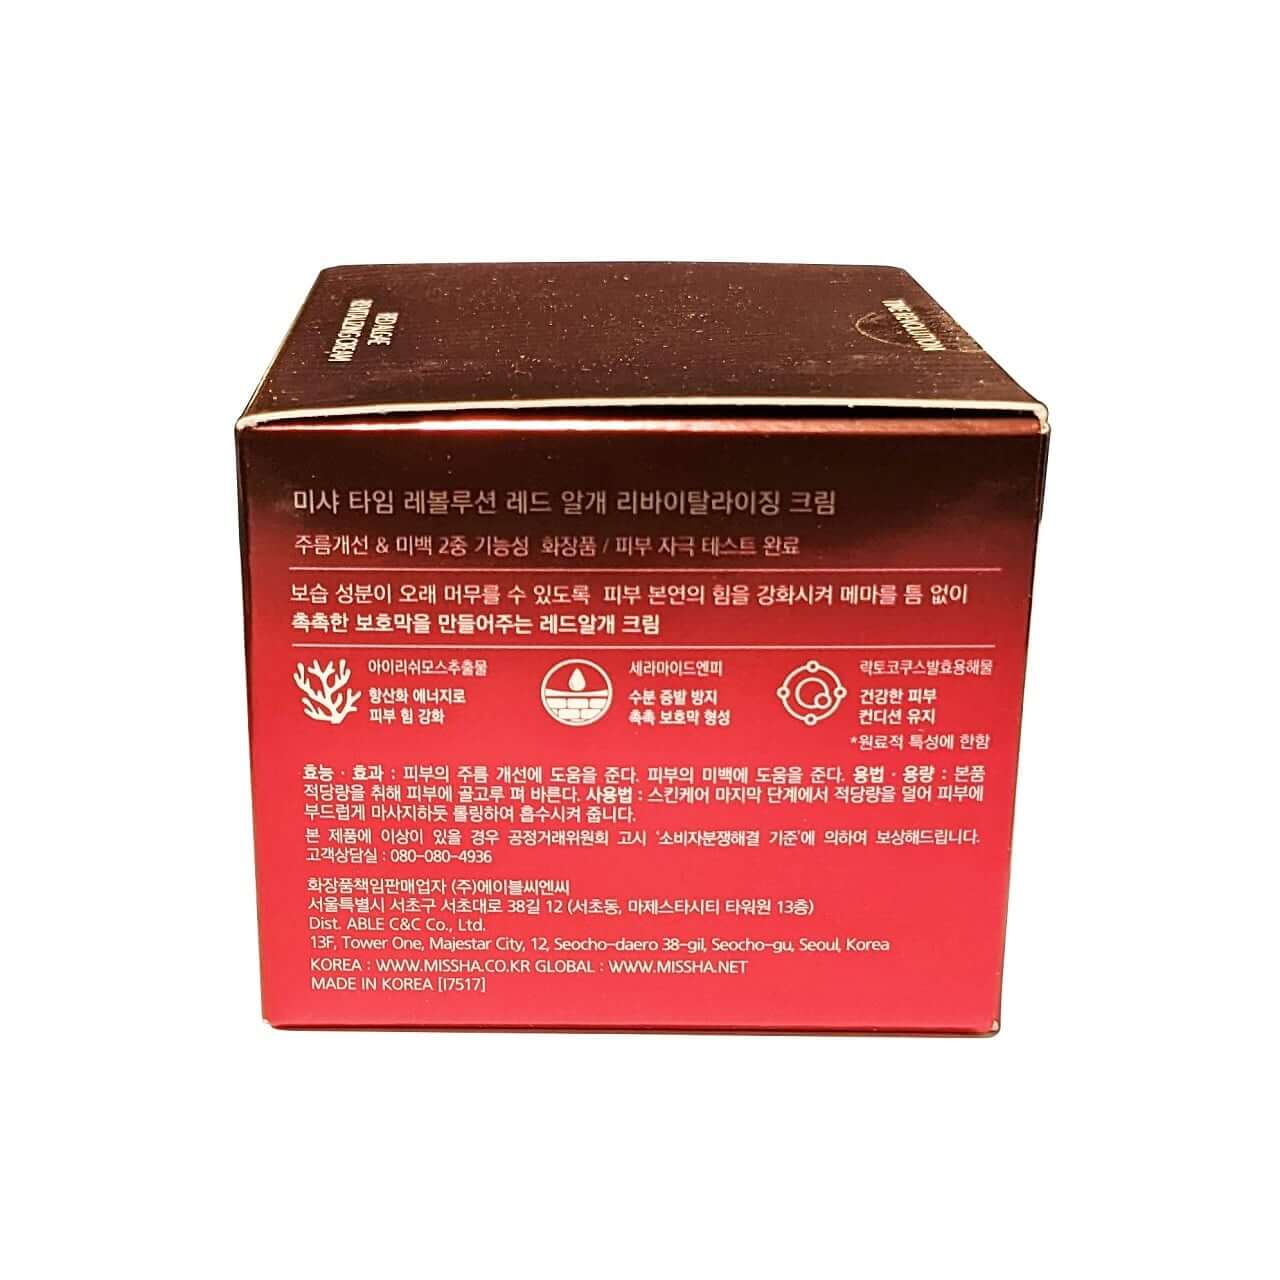 Ingredients, Directions, and Cautions for MISSHA Time Revolution Red Algae Revitalizing Cream (50 mL) in Korean